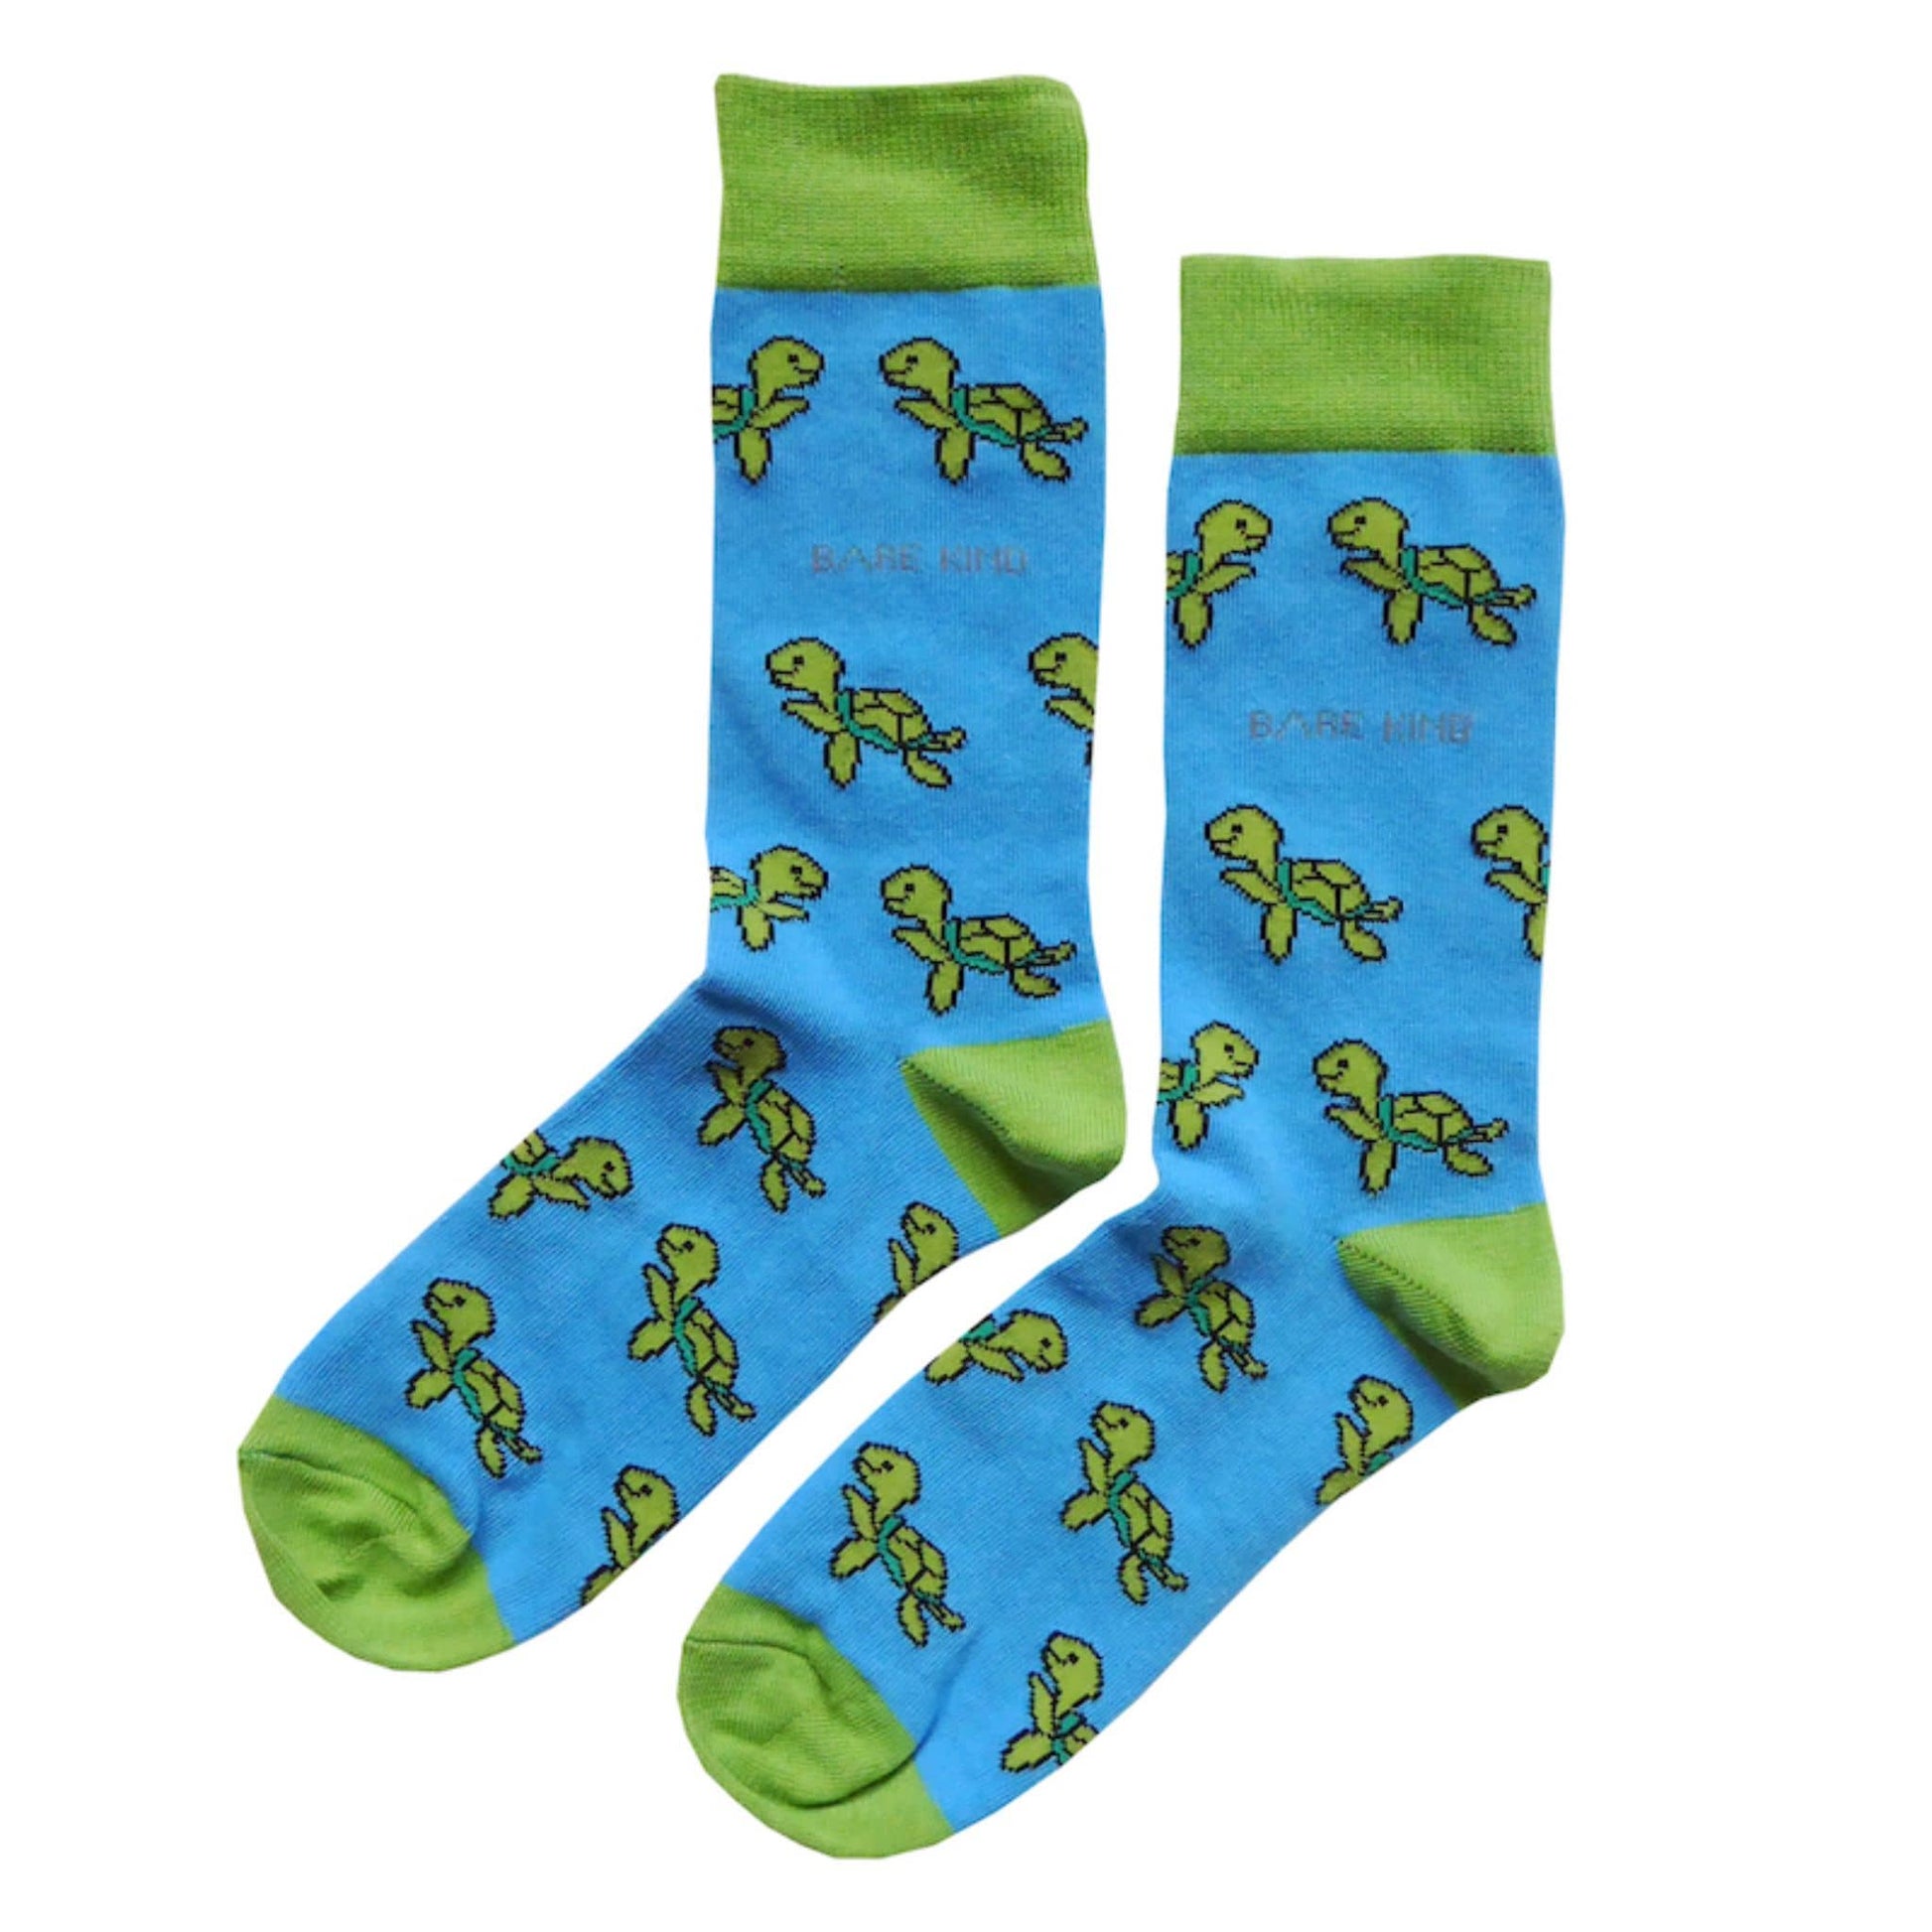 Turtle Socks helping protect turtles - Bamboo Socks in 2 Adult Sizes